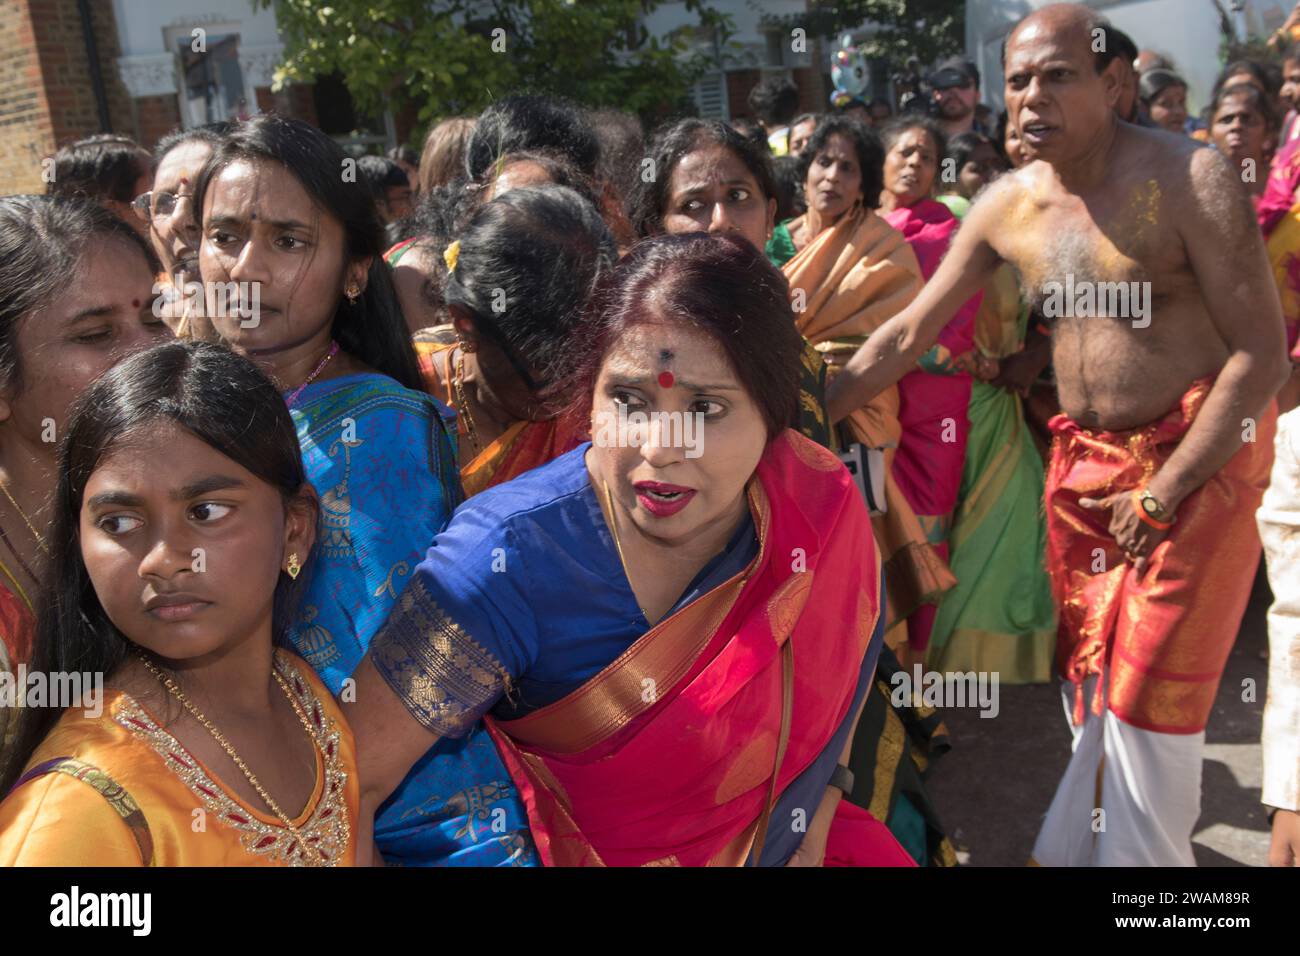 Multi Cultural Britain UK Immigration immigrant group from the Hindu Tamil community attend and take part in a traditional Hindu annual festival in suburban Wimbledon London England 2022 2000s HOMER SYKES Stock Photo